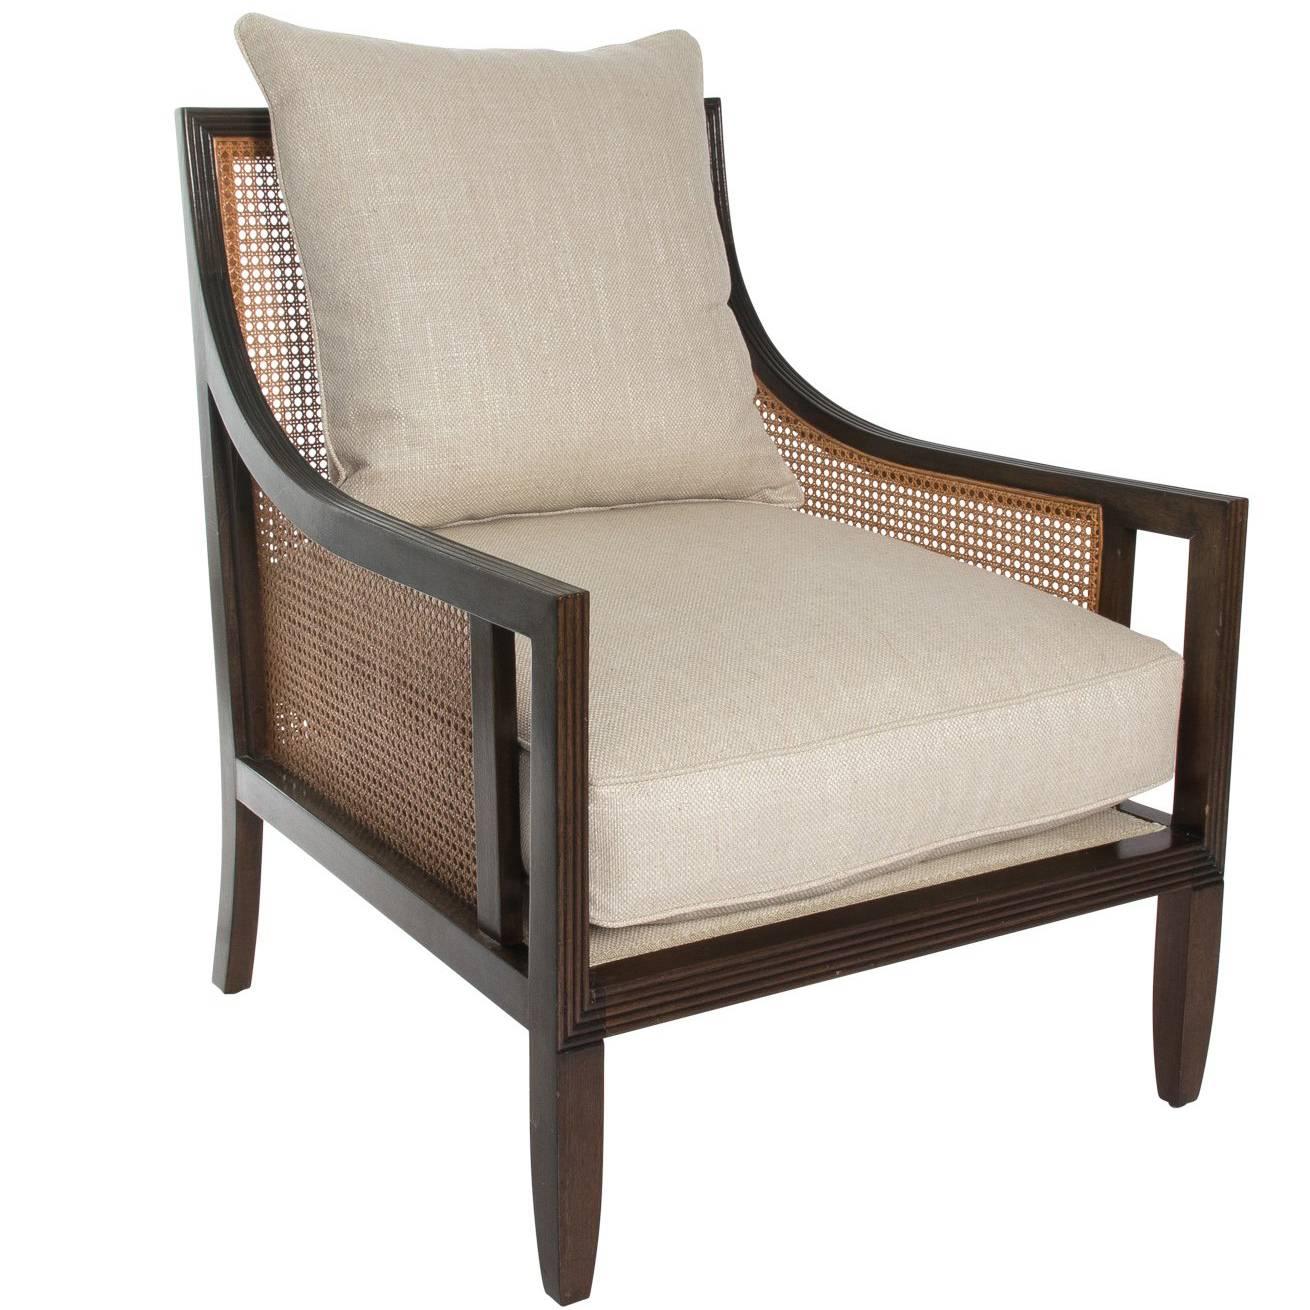 1970s Mid-Century Caned Lounge Chair